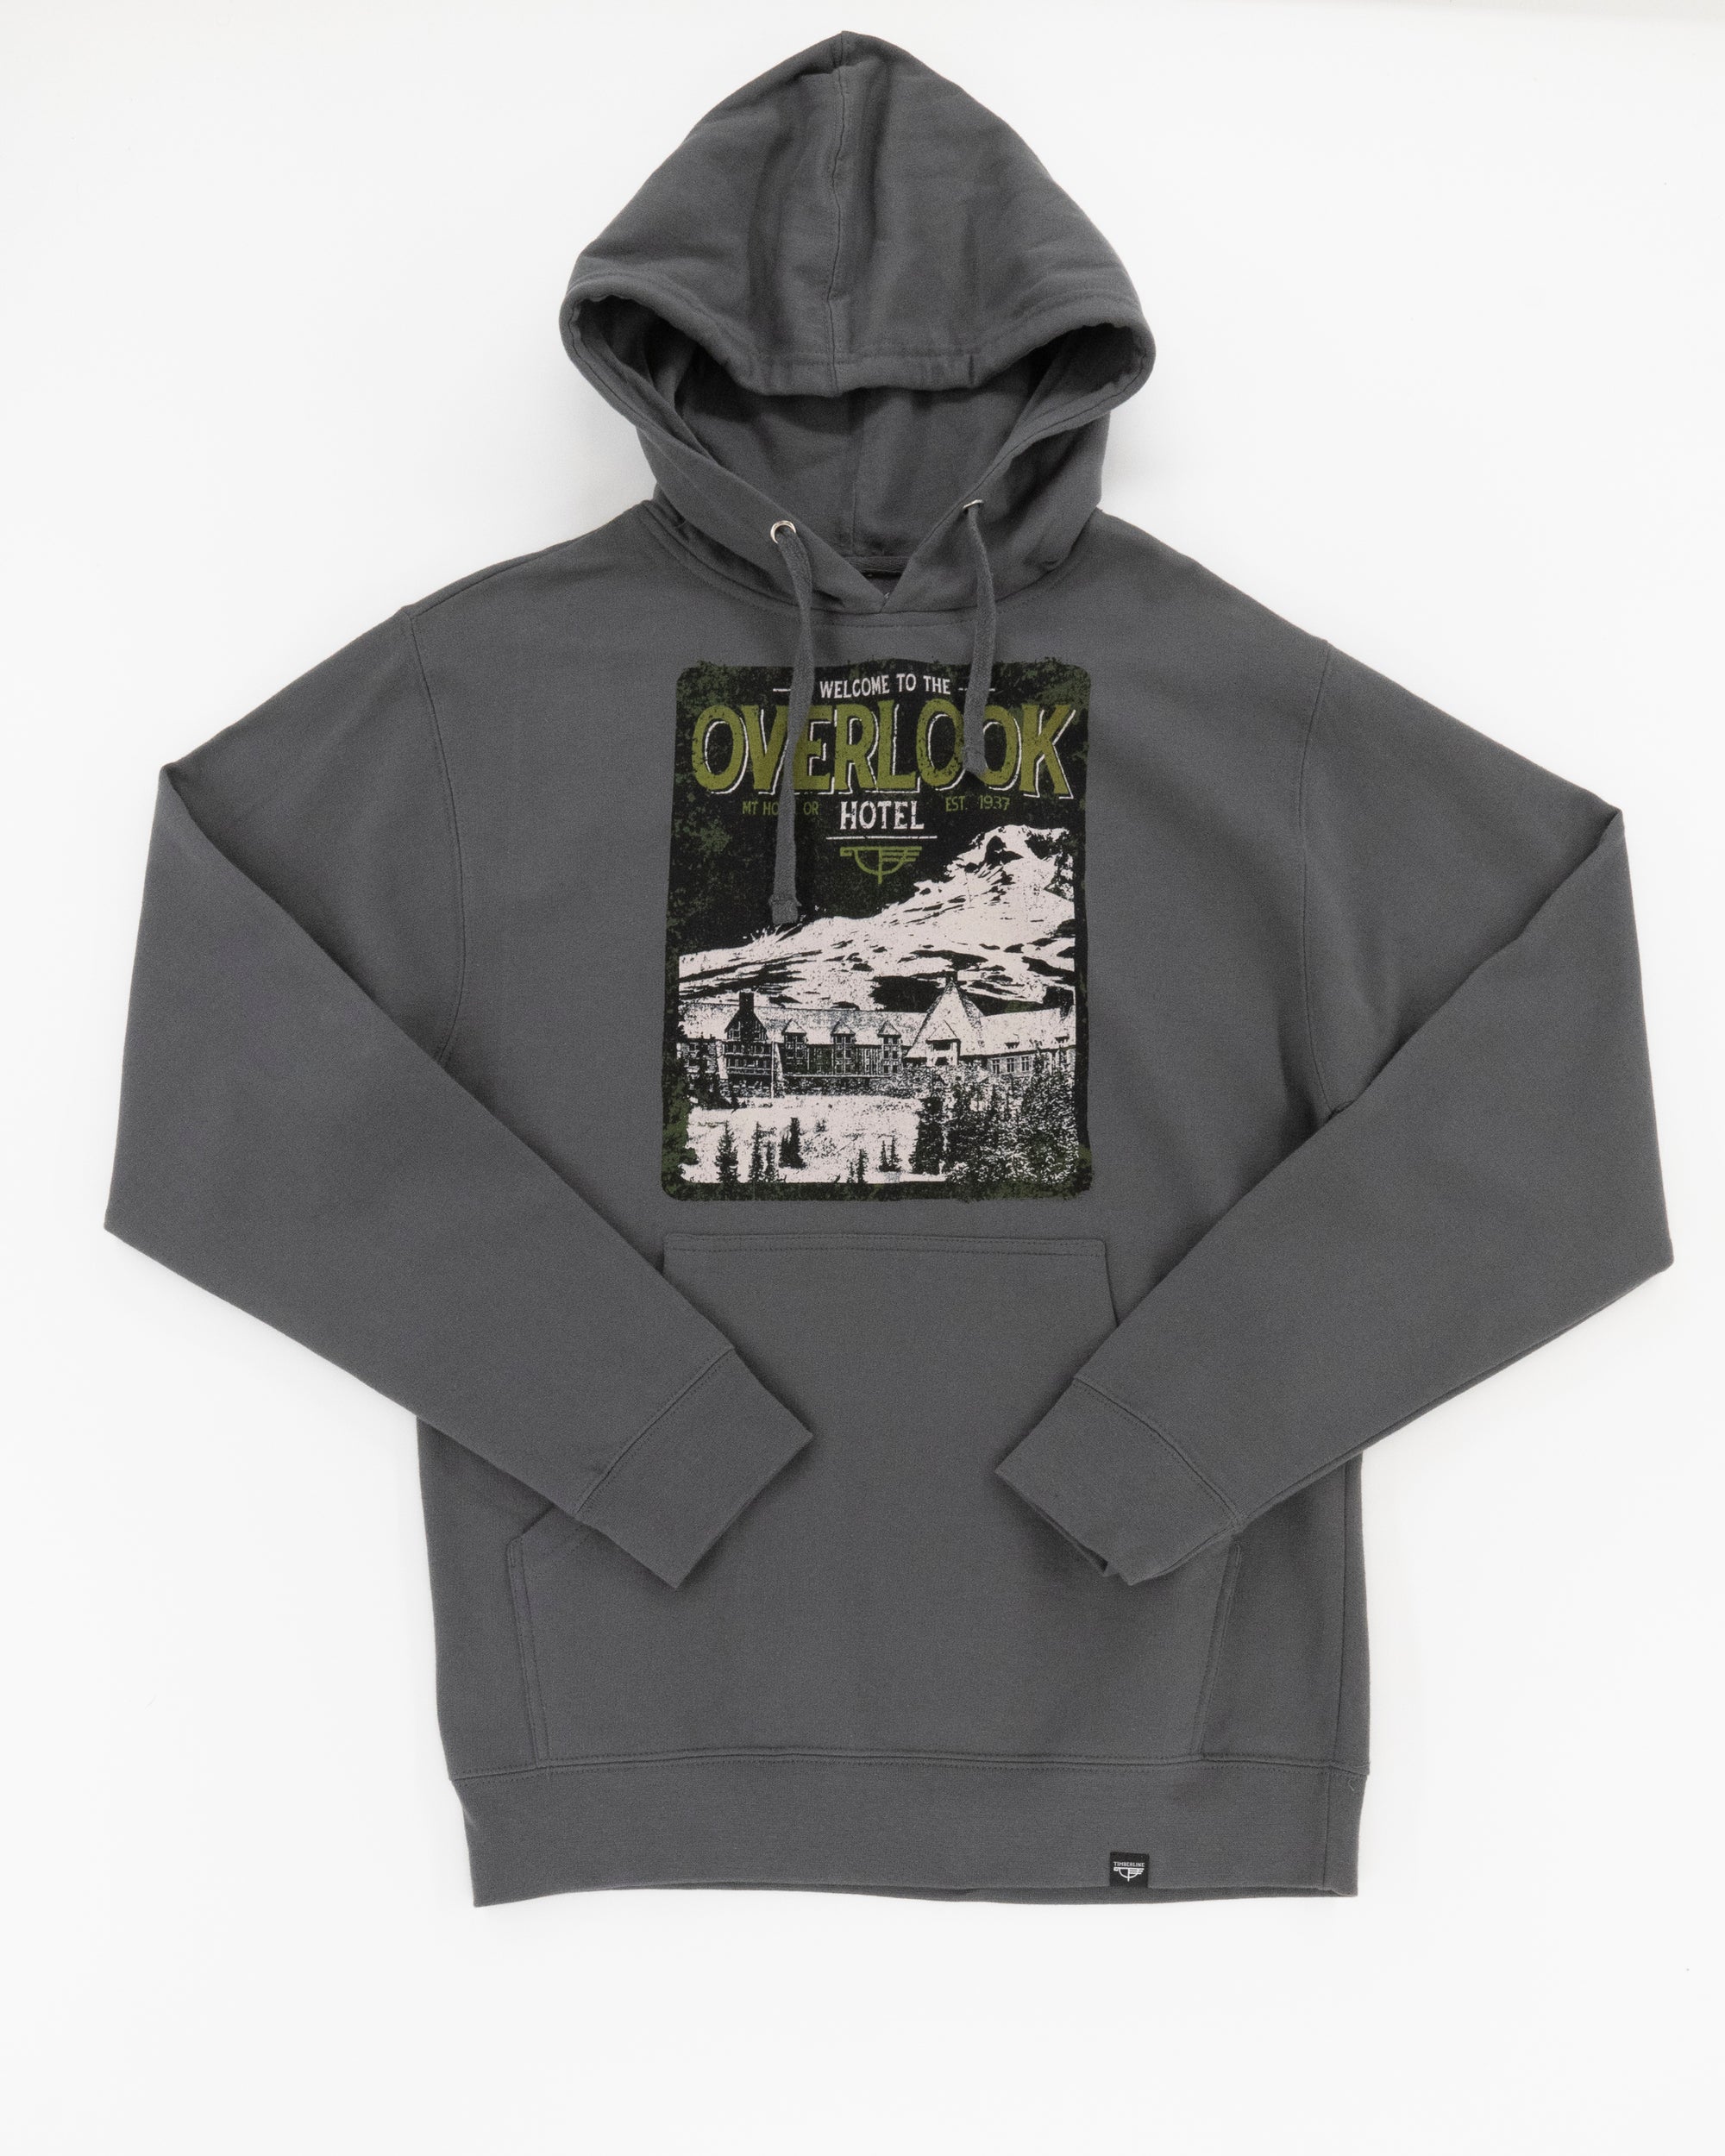 A gray hooded sweatshirt with a graphic design featuring the Timberline Lodge from a fictional setting, laid out flat against a white background.